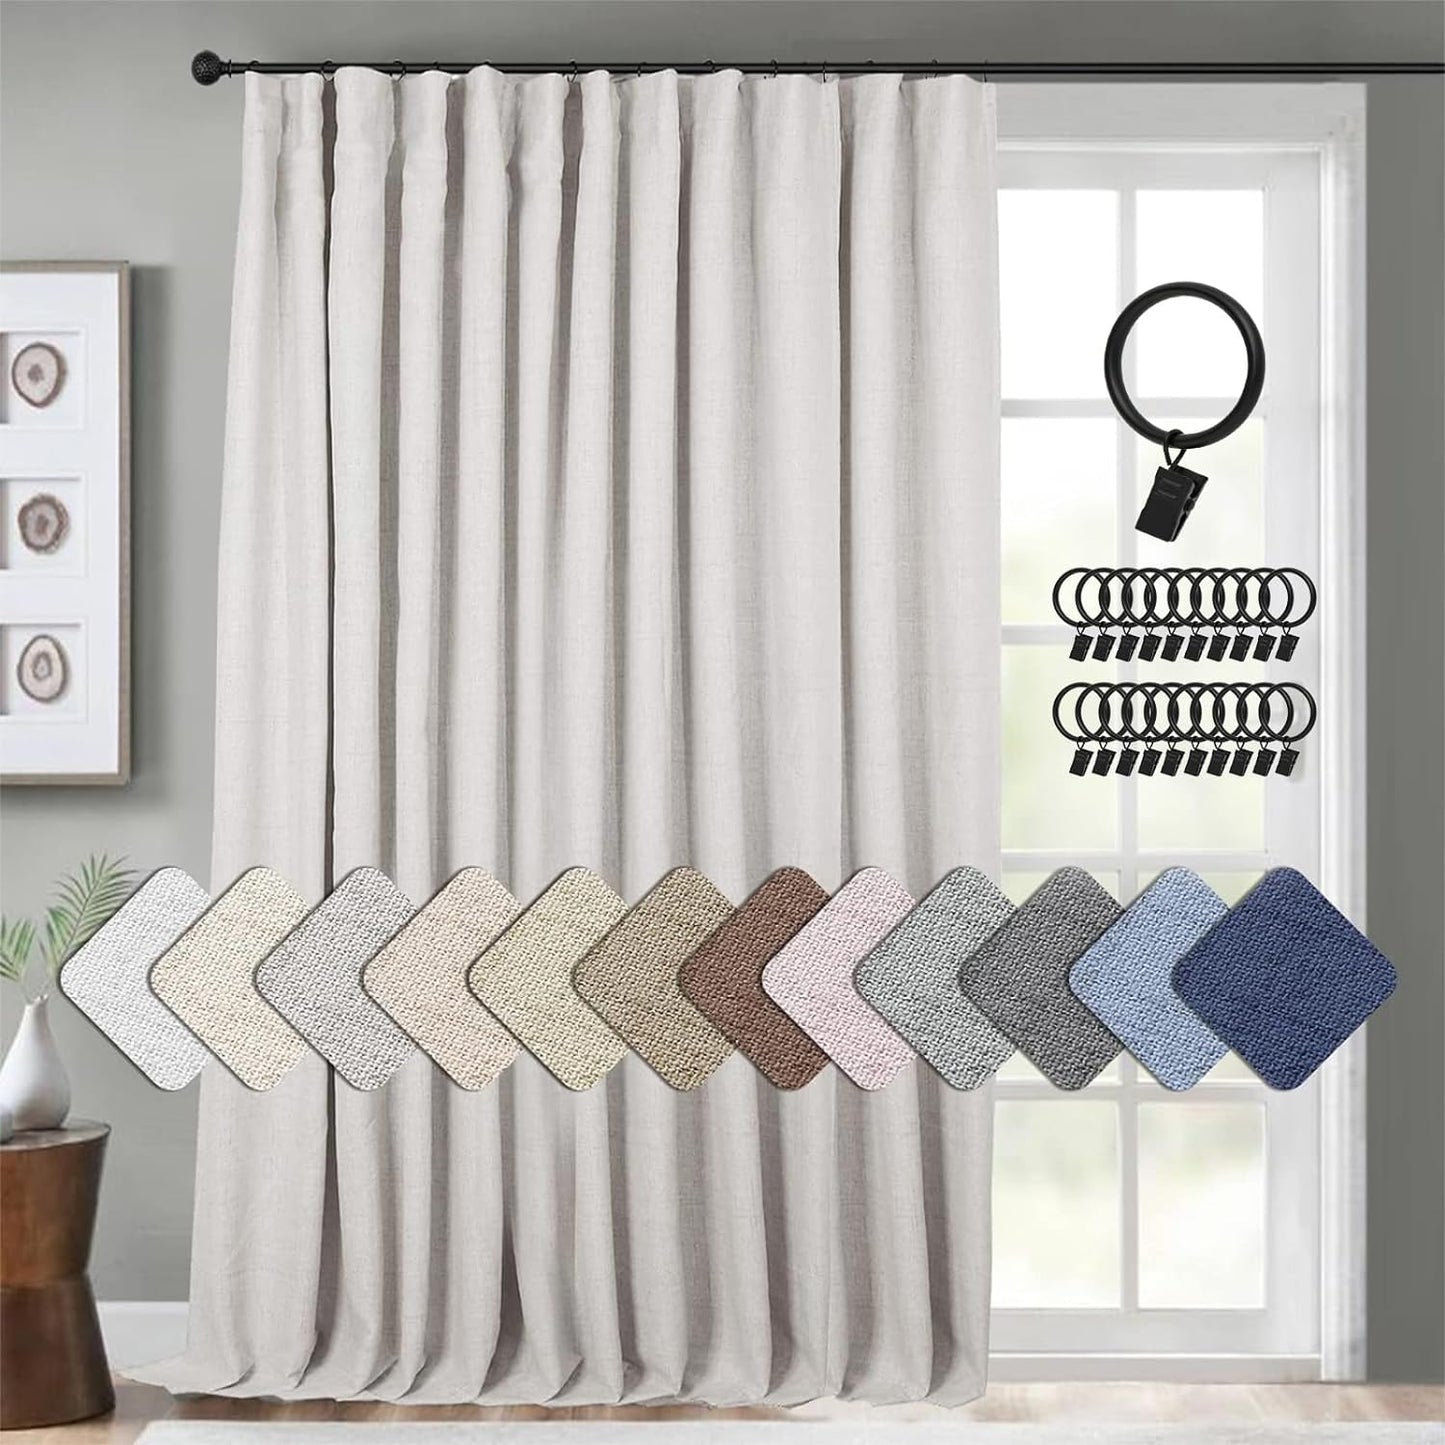 INOVADAY Linen Blackout Curtains 96 Inches Long, Thermal Insulated Black Out Curtains & Drapes for Living Room Bedroom (W50 X L96 1 Panels, Beige)  INOVADAY Beige 100"W X 84"L 